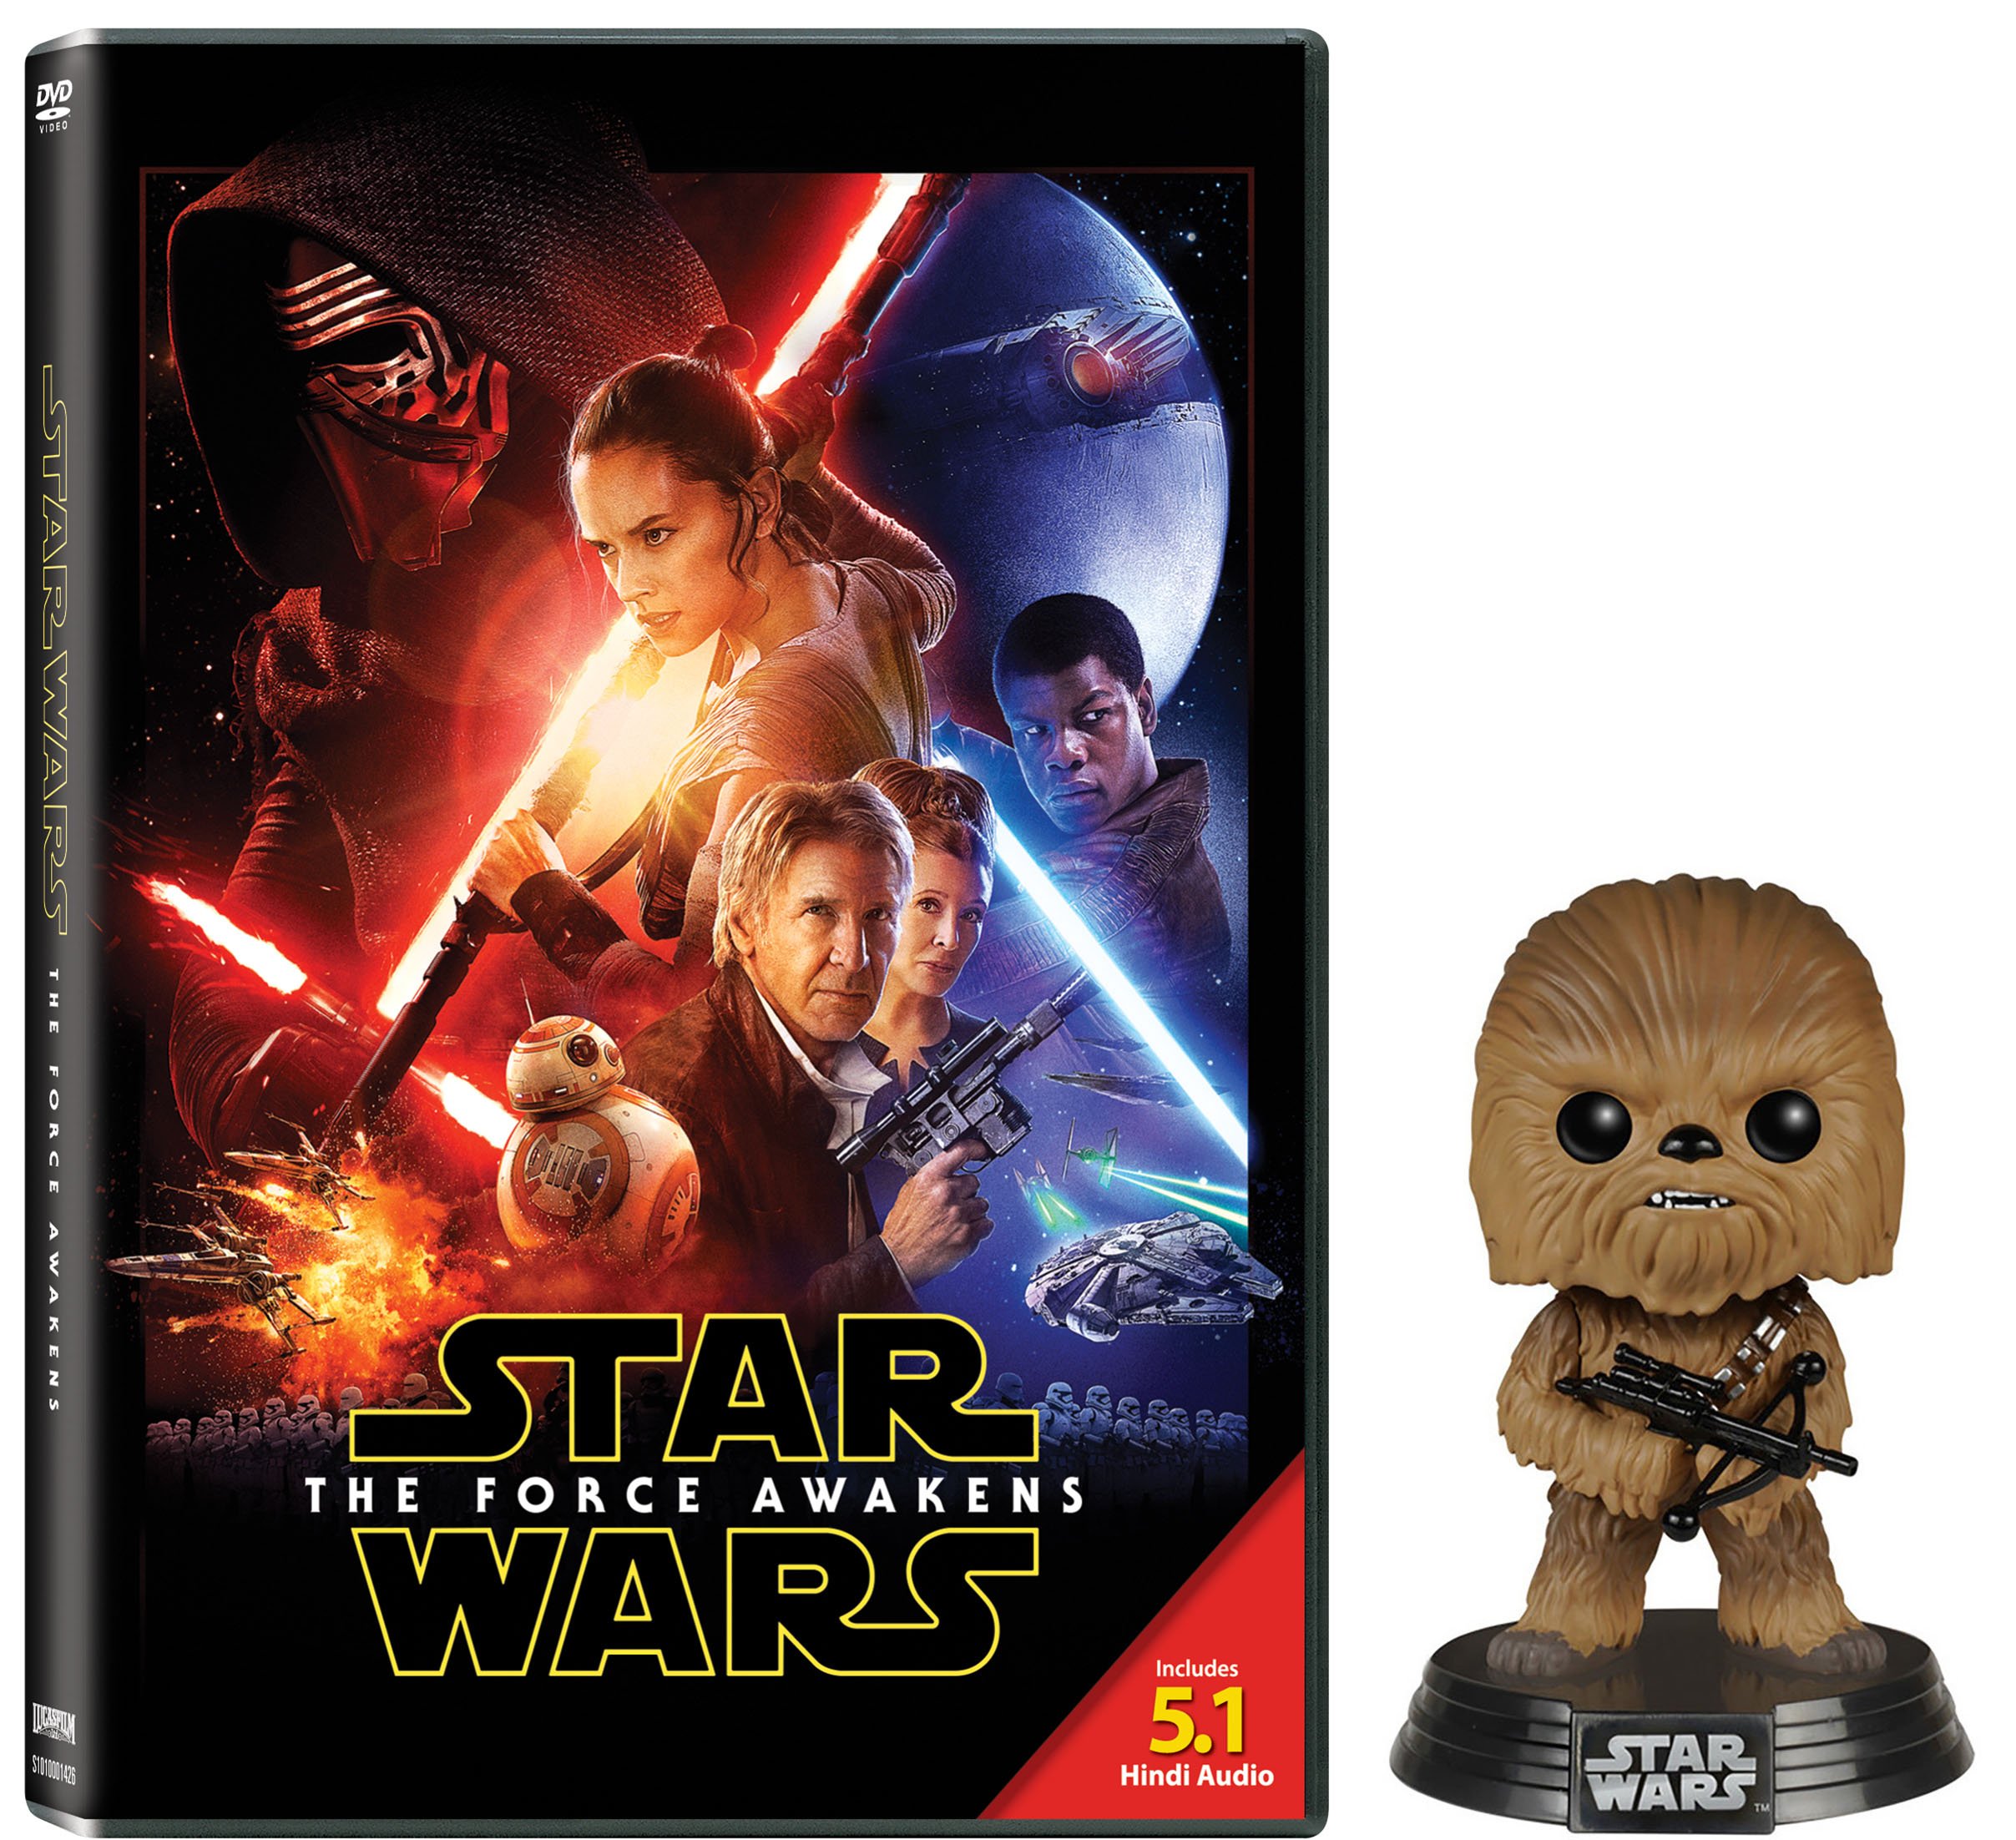 star-wars-the-force-awakens-with-chewbacca-bobble-head-movie-purchase